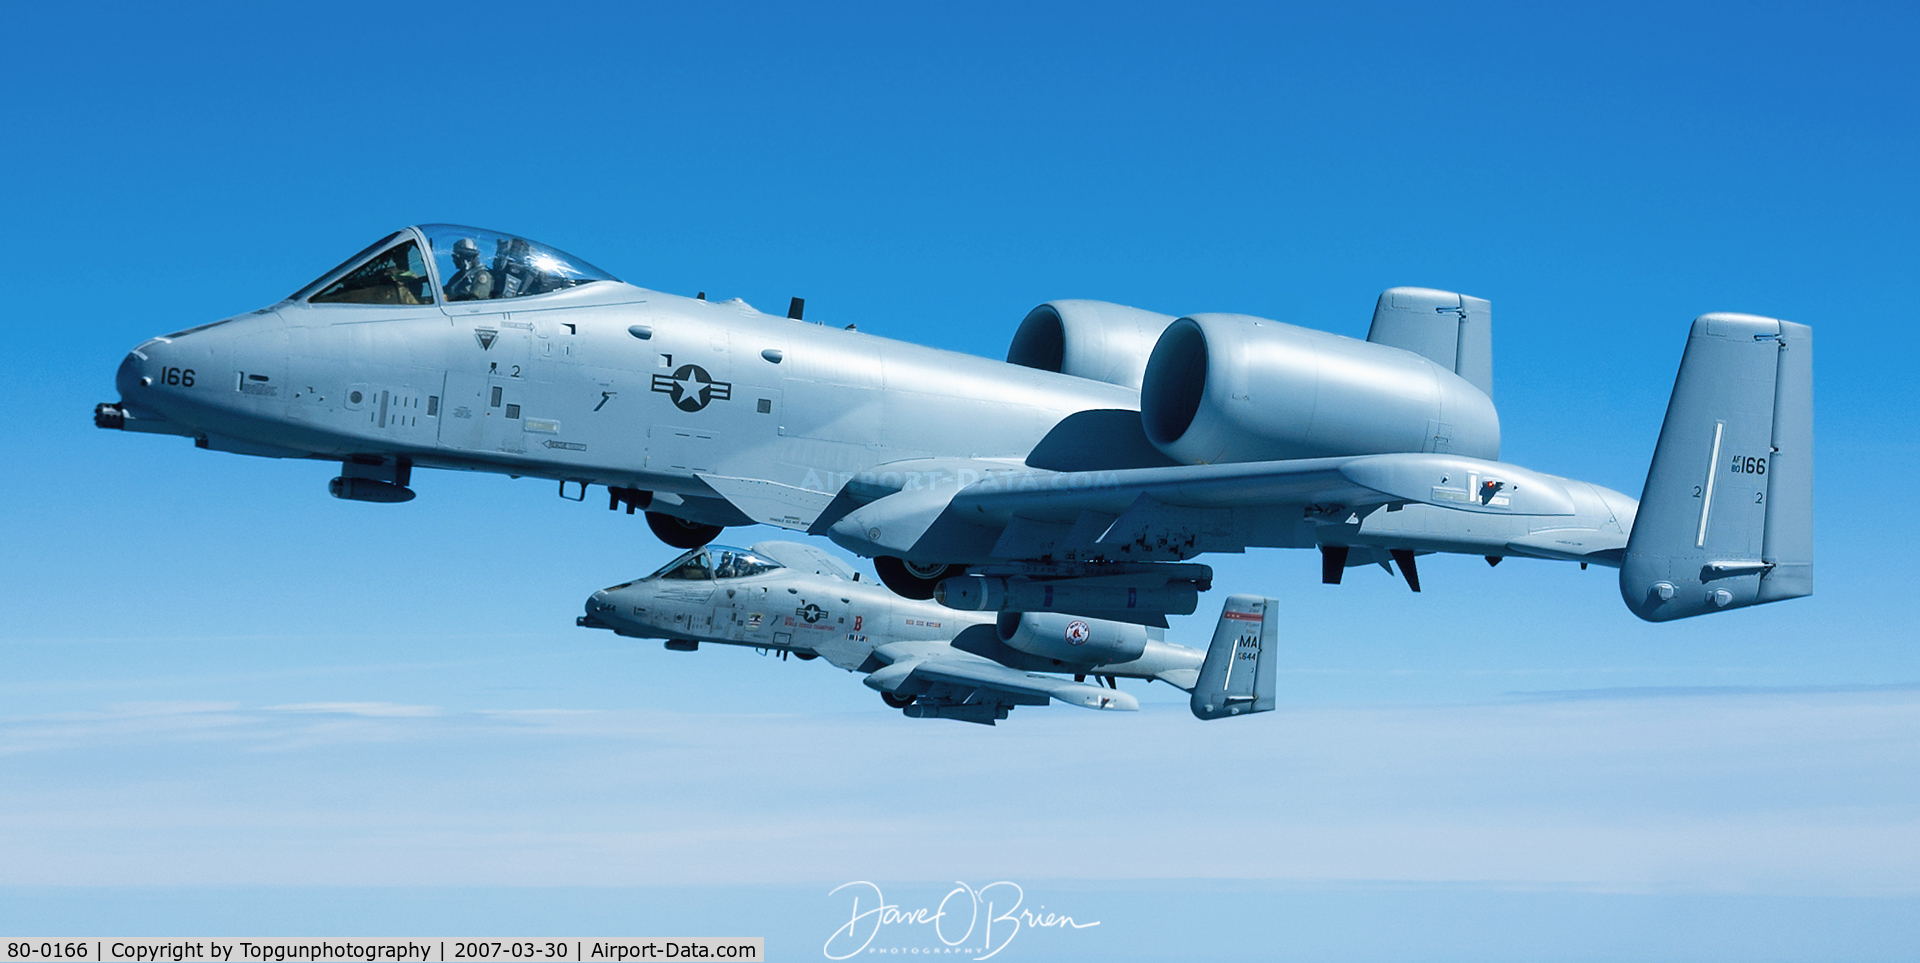 80-0166, 1980 Fairchild Republic A-10C Thunderbolt II C/N A10-0516, A clean A-10 prepped to leave the 104th flying in a 4 ship record flight for amount of hours for 4 A-10 pilots flying for the 104th FW/MA ANG.